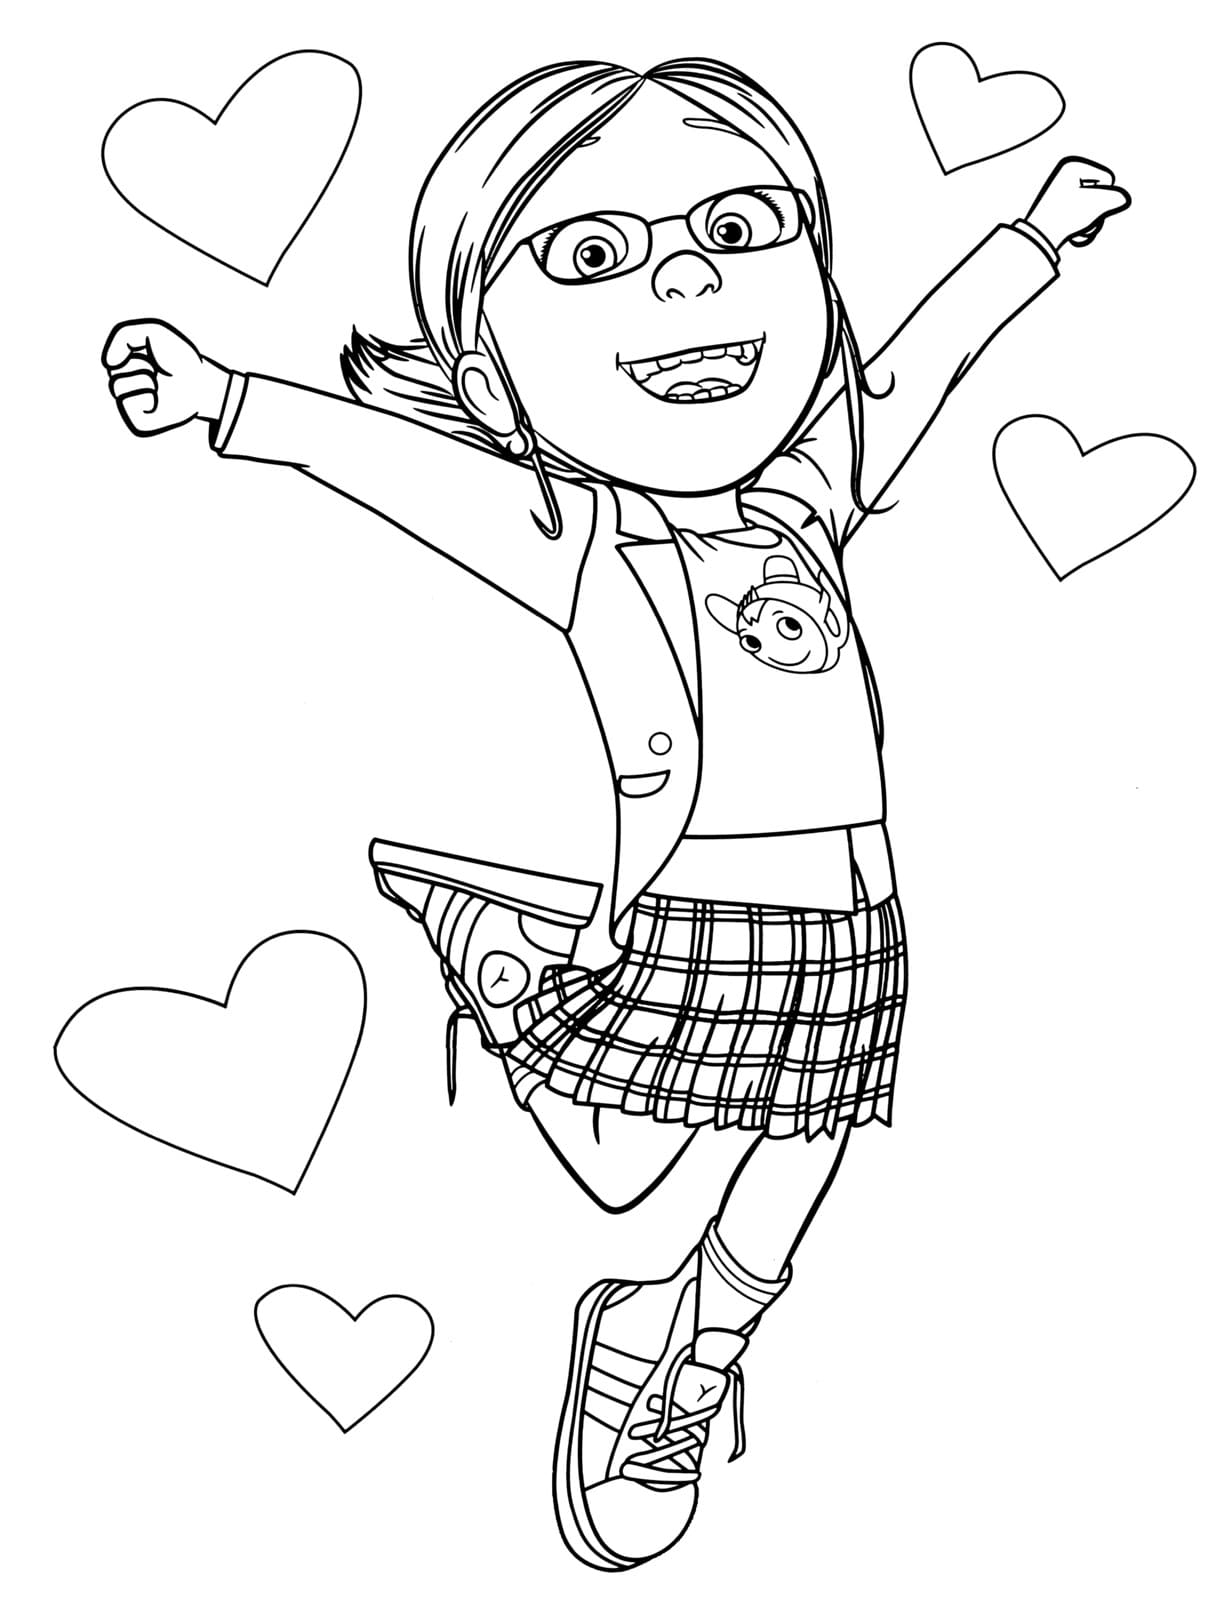 Despicable Me Coloring Pages 90 Free Coloring Pages - vrogue.co